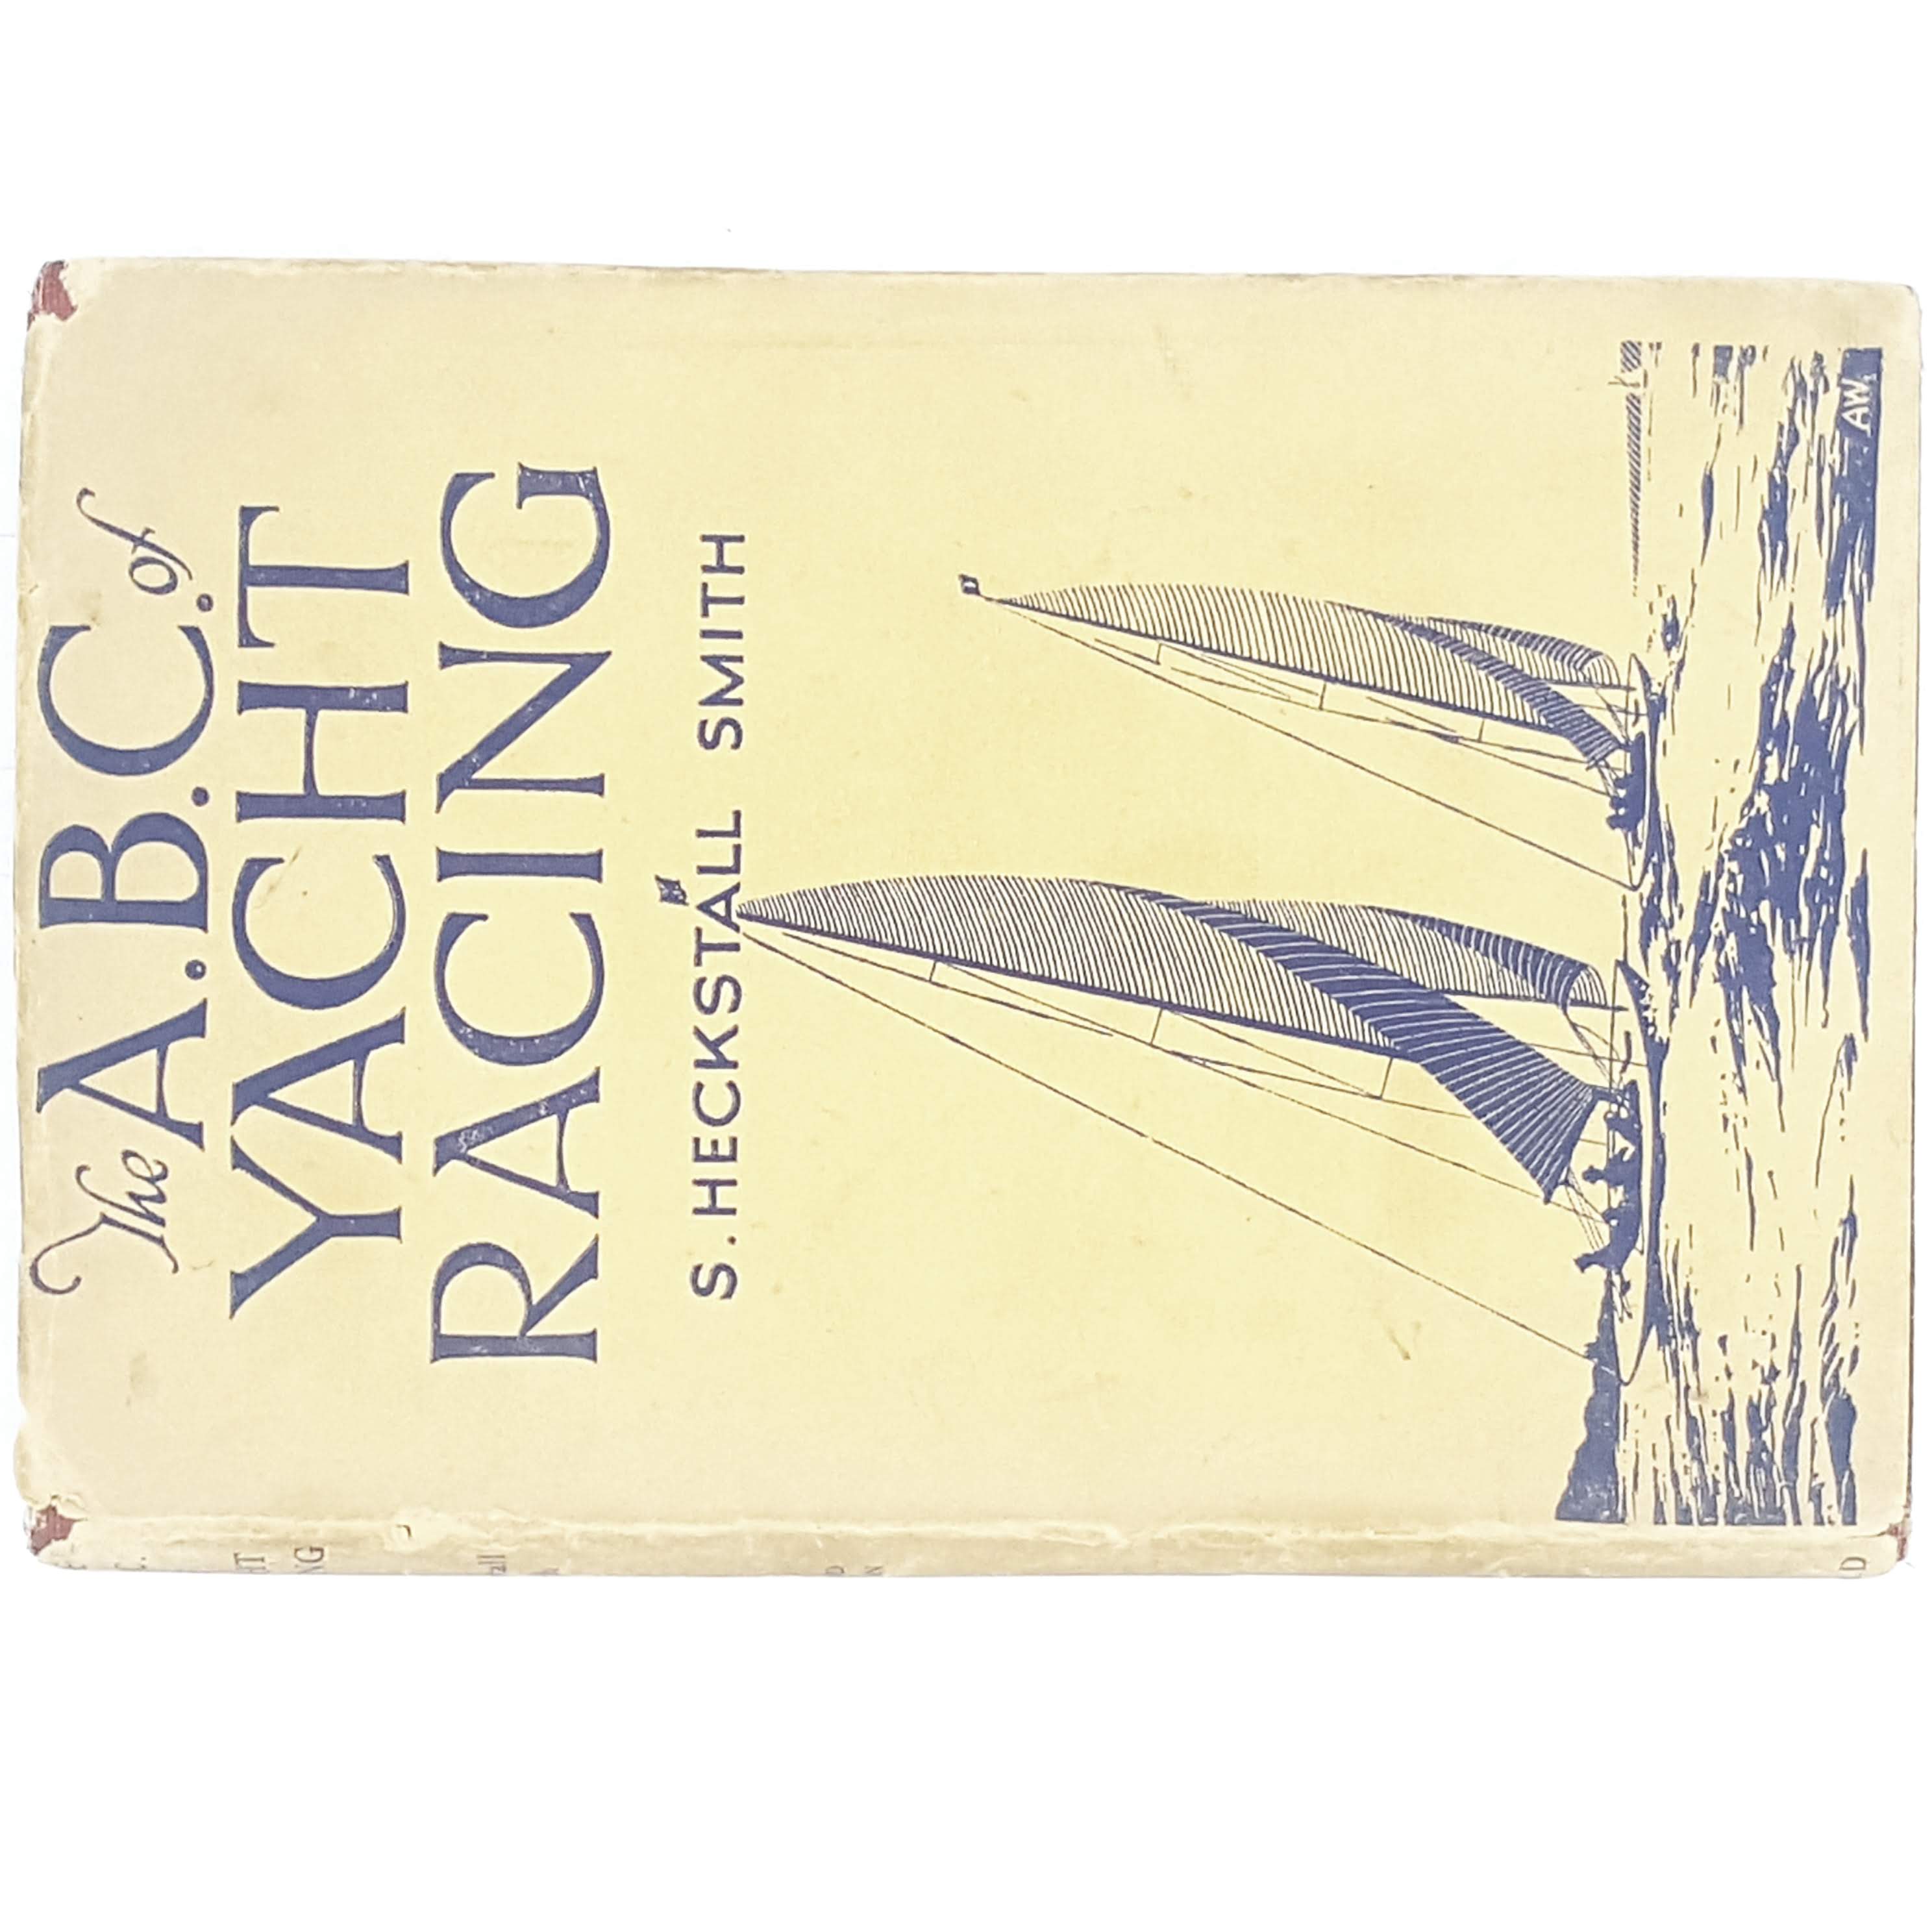 ILLUSTRATED THE ABC OF YACHT RACING 1949